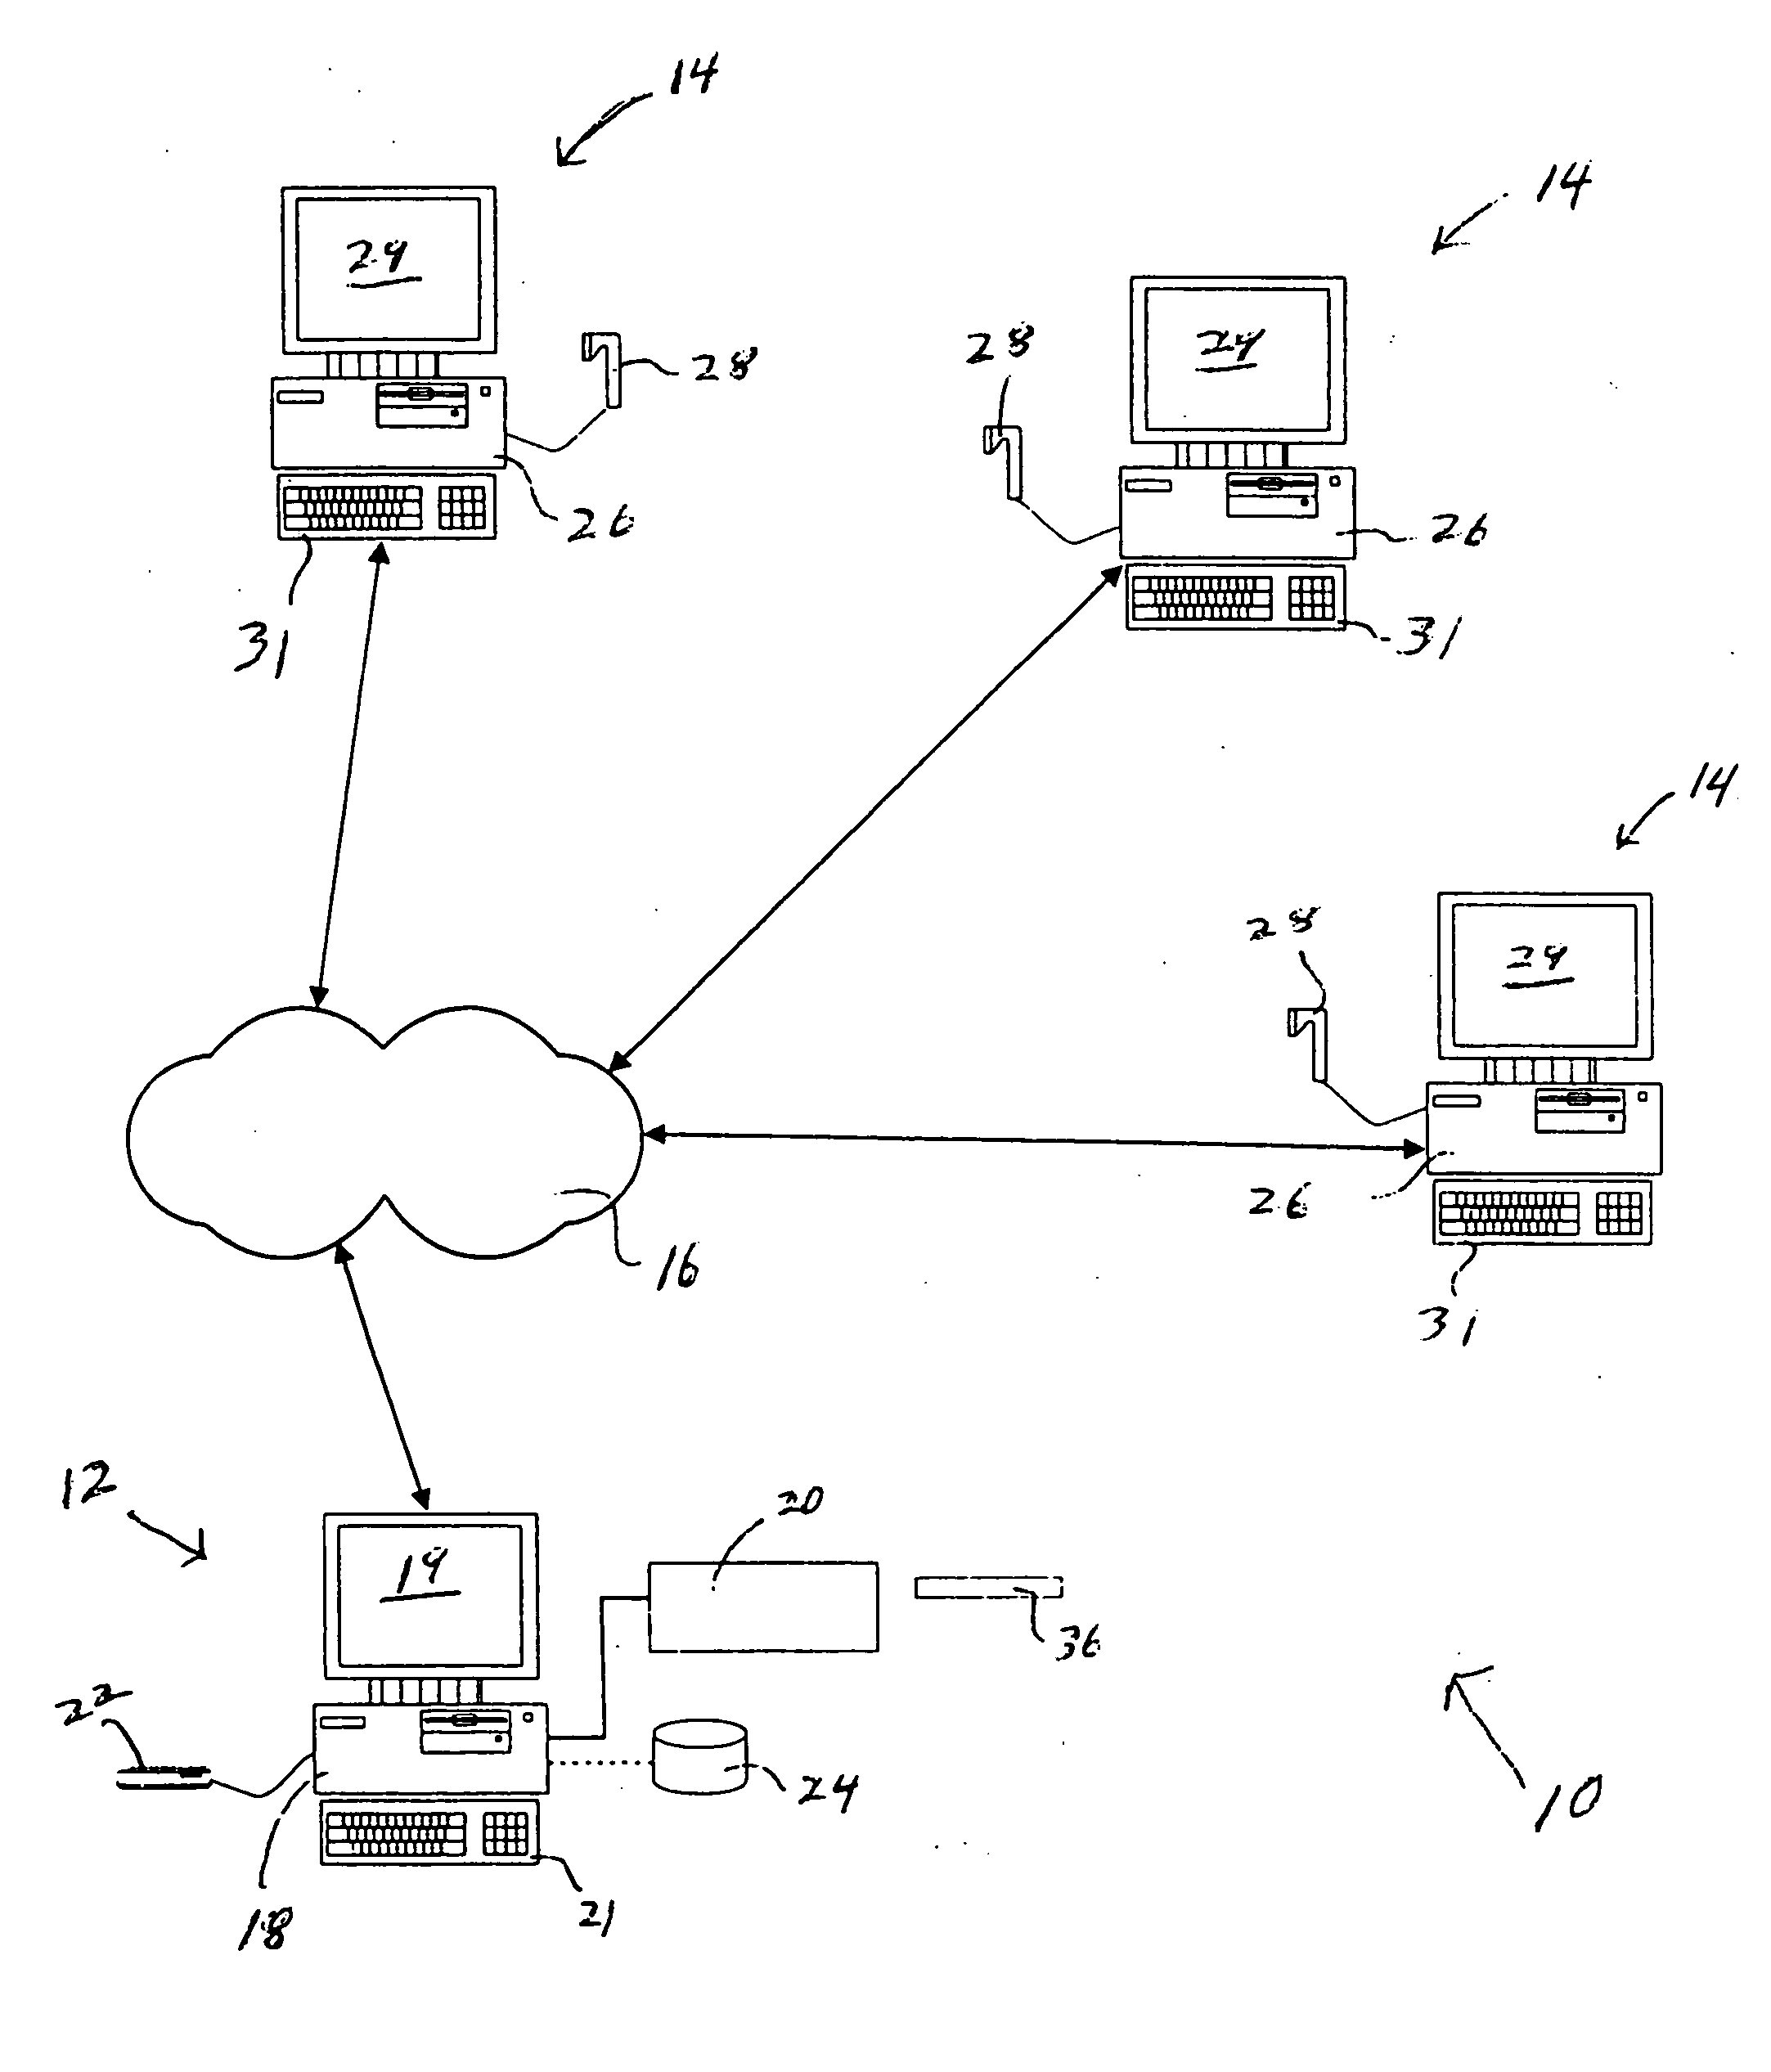 System and method for authorizing transactions